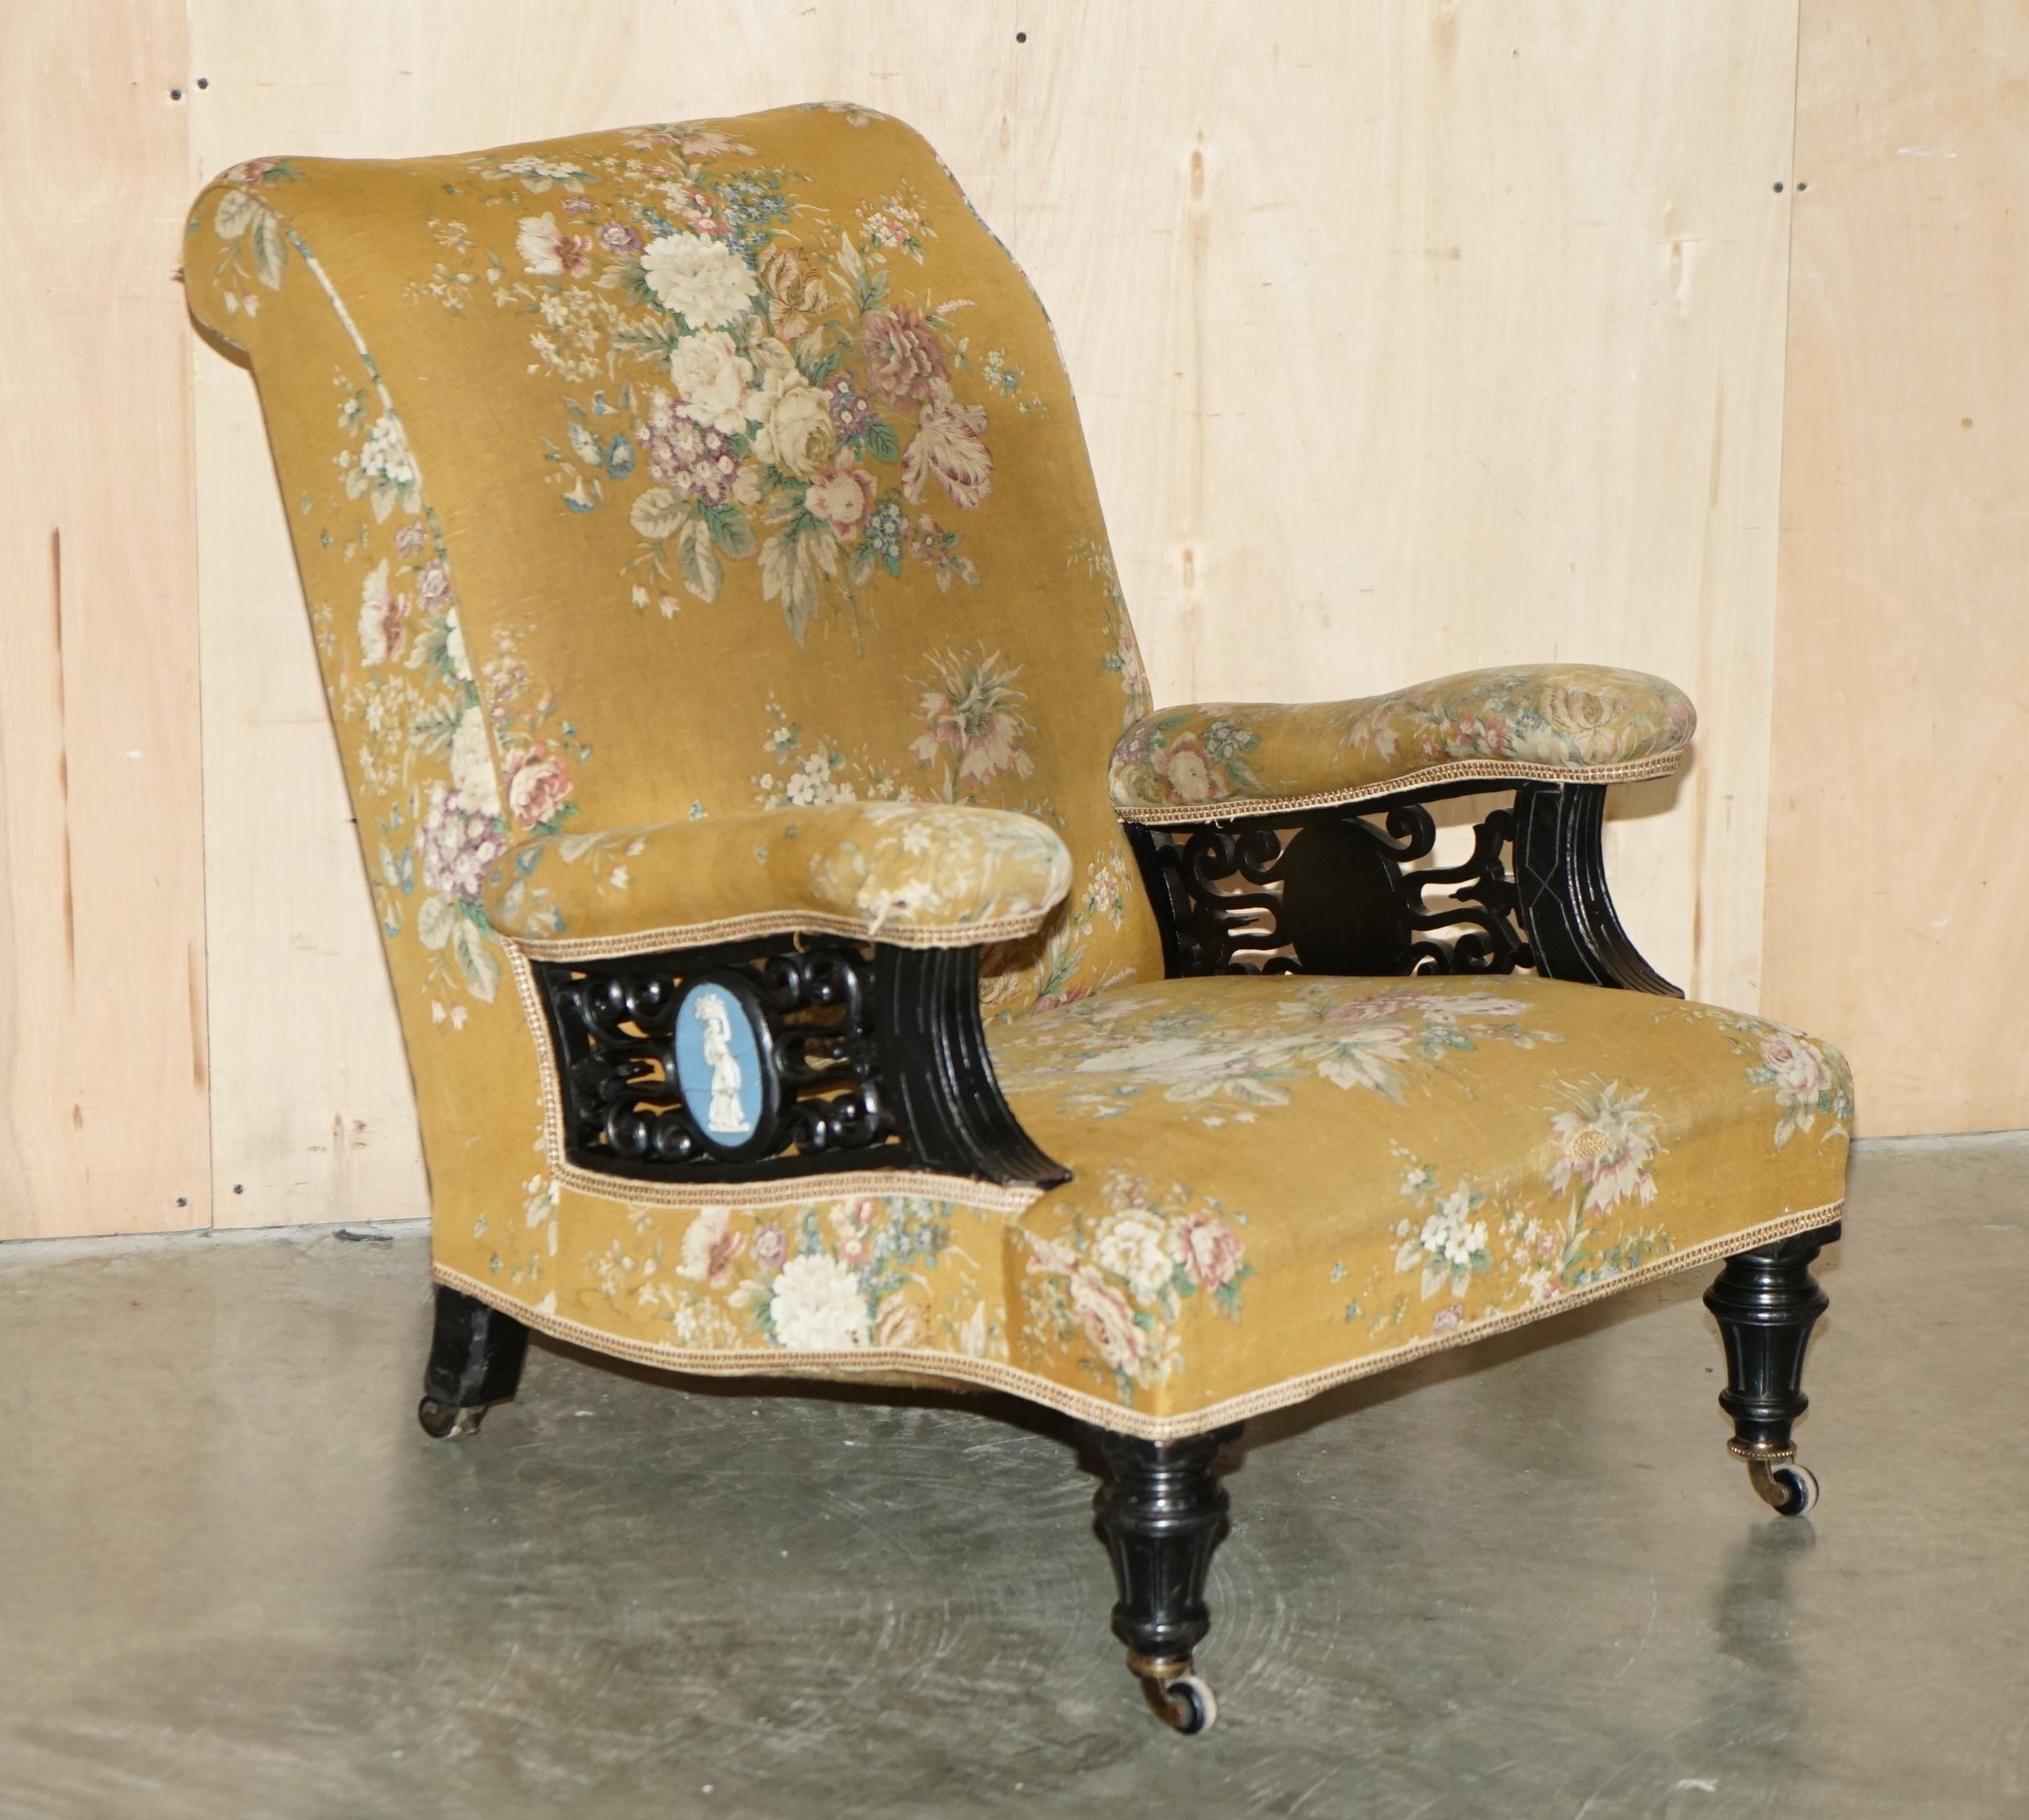 Royal House Antiques

Royal House Antiques is delighted to offer for sale this super rare and totally original Aesthetic Movement, Victorian circa 1840-1860 Library armchair with inset Grand Tour Italian plaques and period floral upholstery 

Please